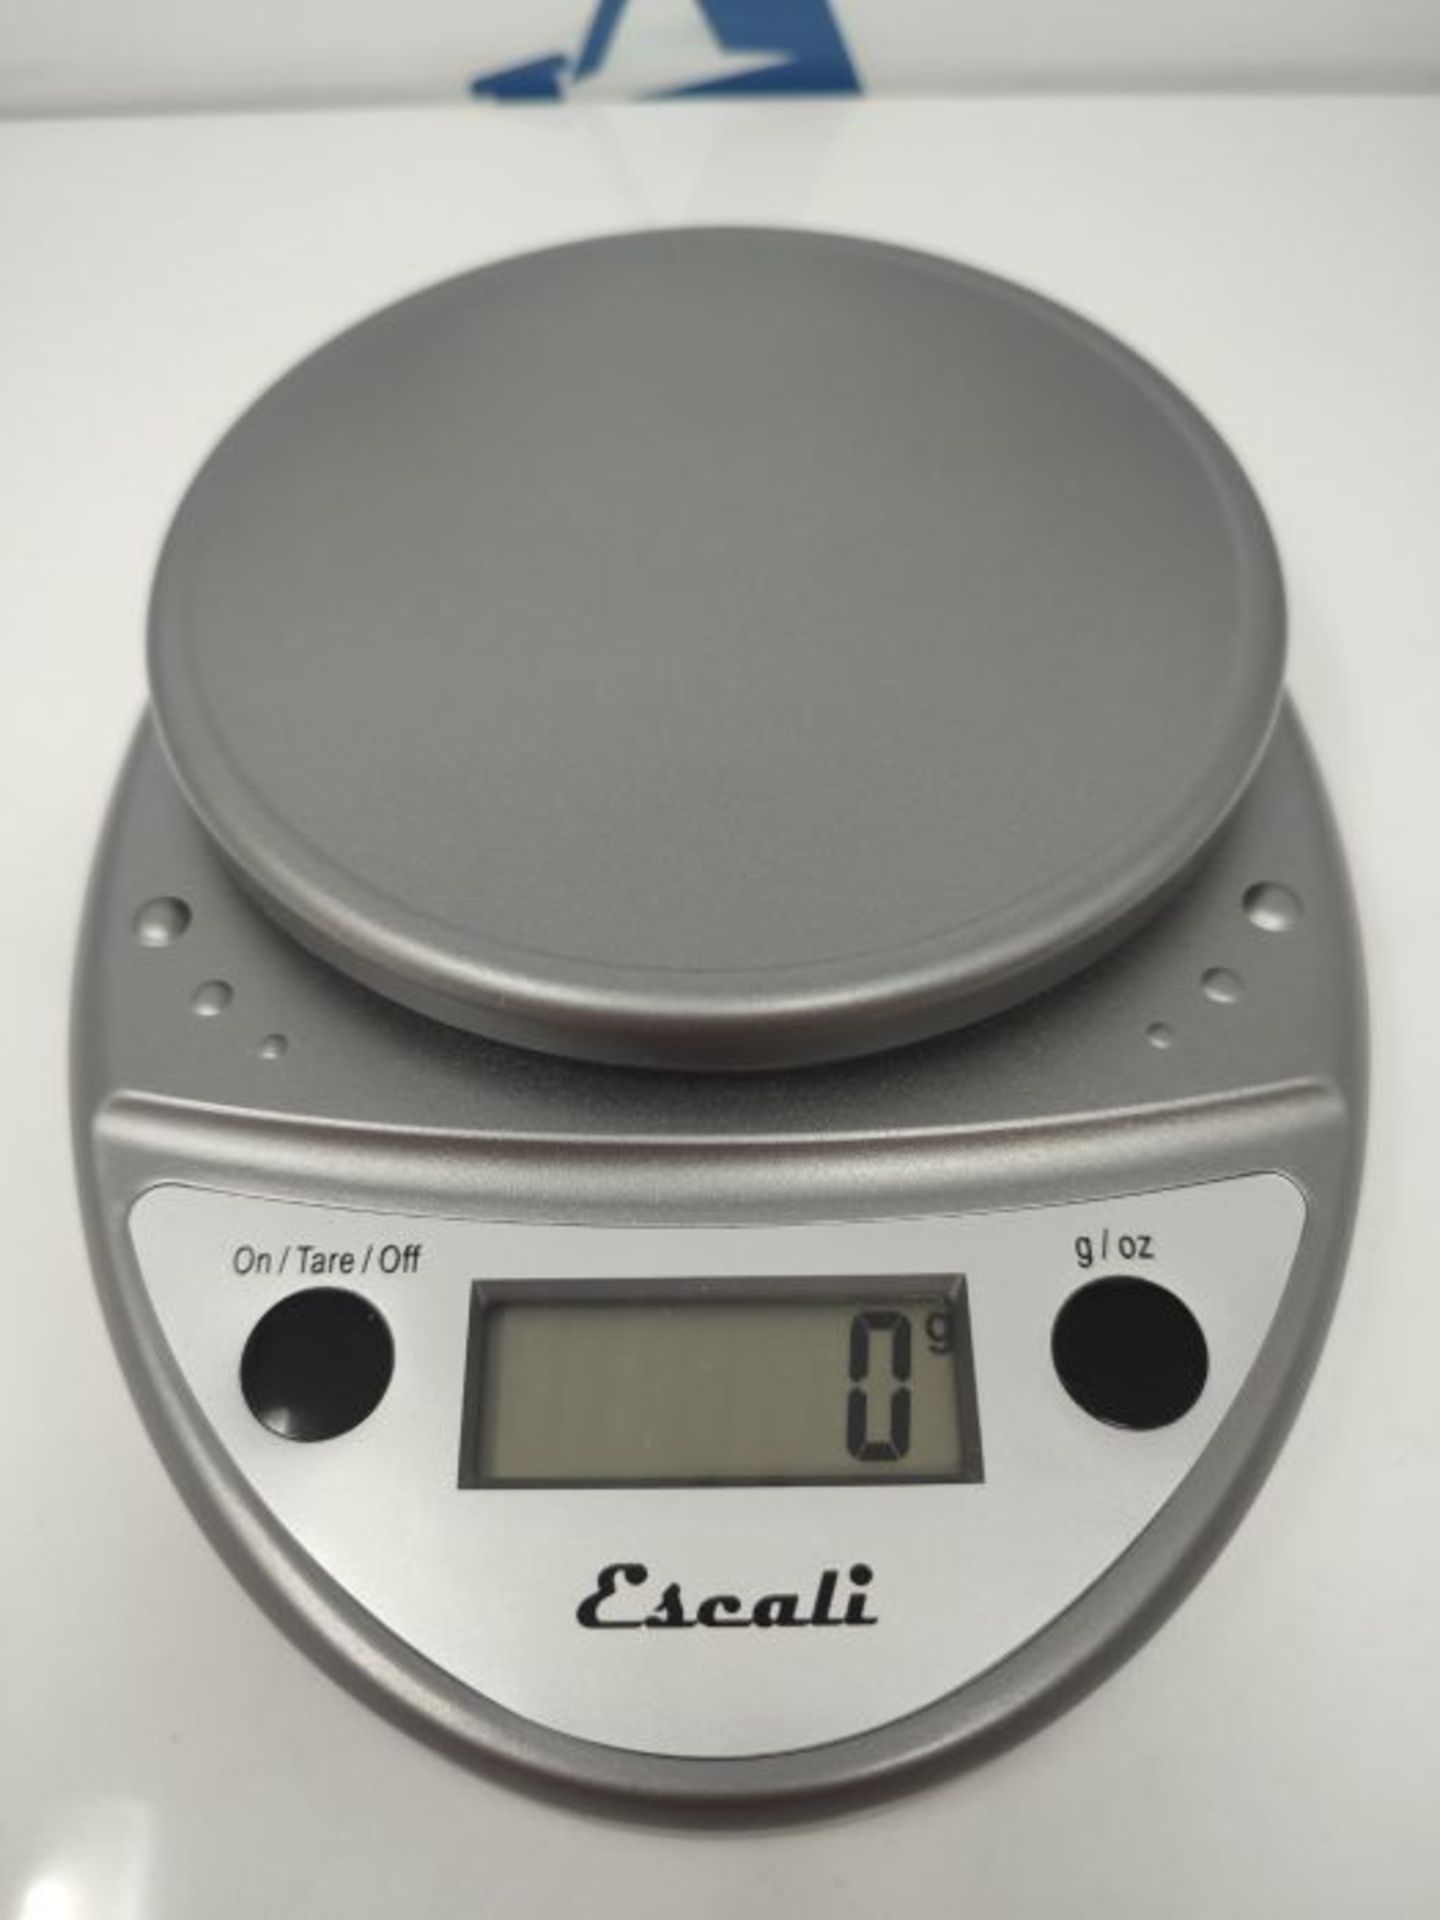 Escali Primo P115M Precision Kitchen Food Scale for Baking and Cooking, Lightweight an - Image 5 of 5